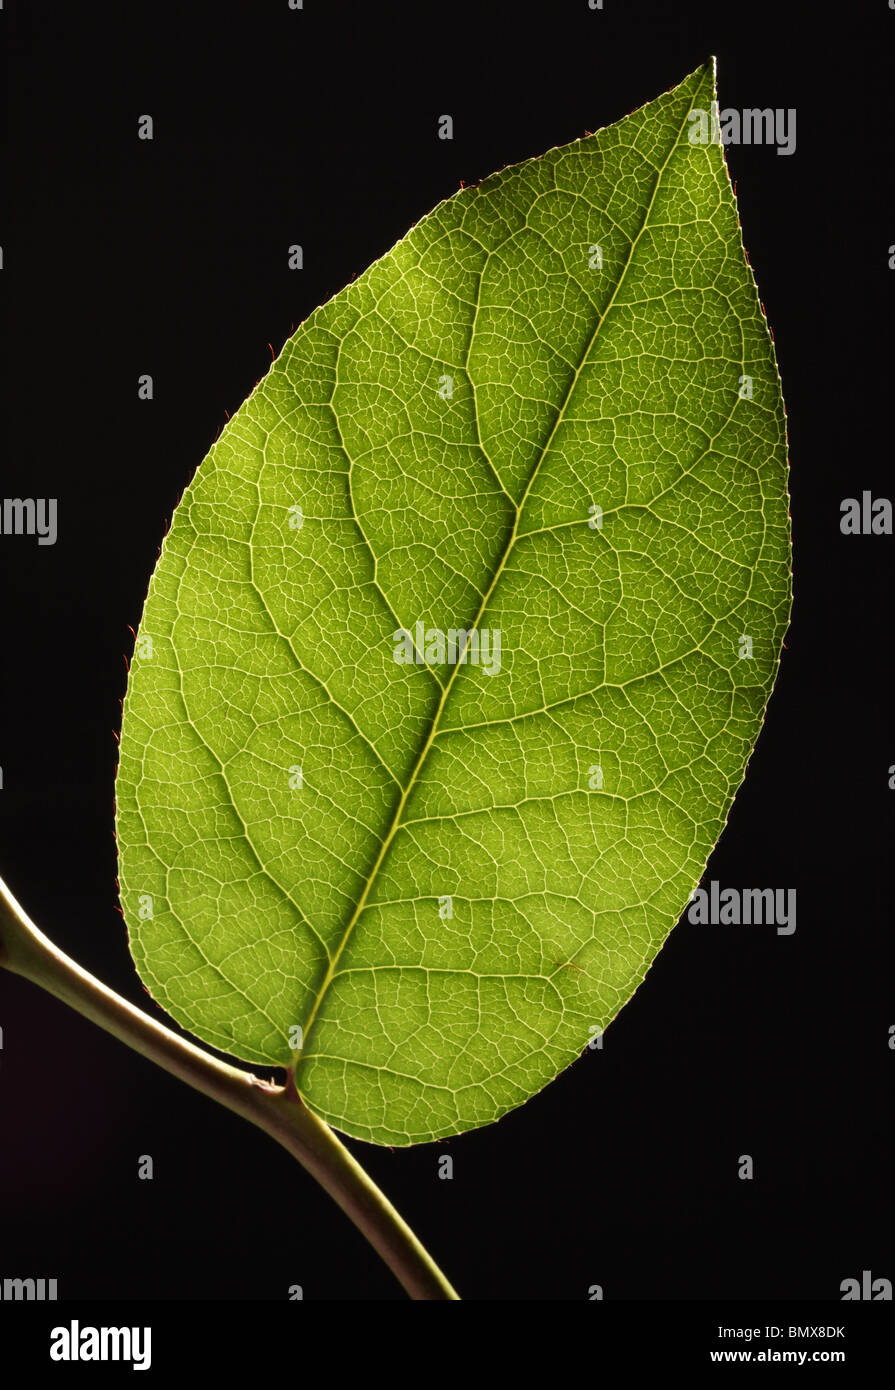 Green plant leaf on a branch, black background Stock Photo